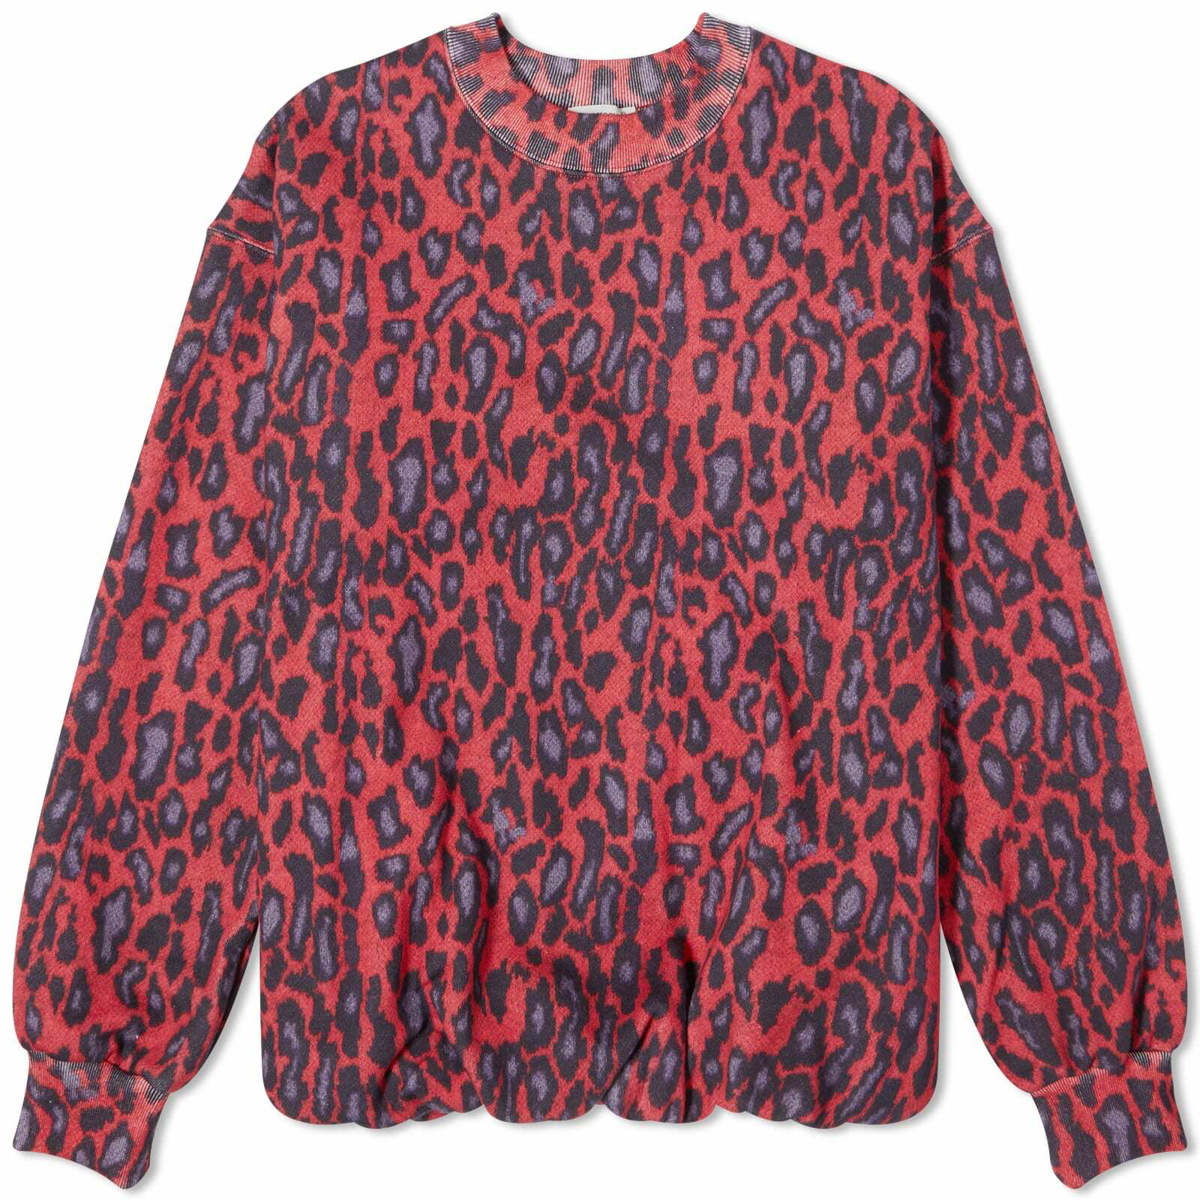 Undercover Women's Leopard Sweater in Red Base Undercover